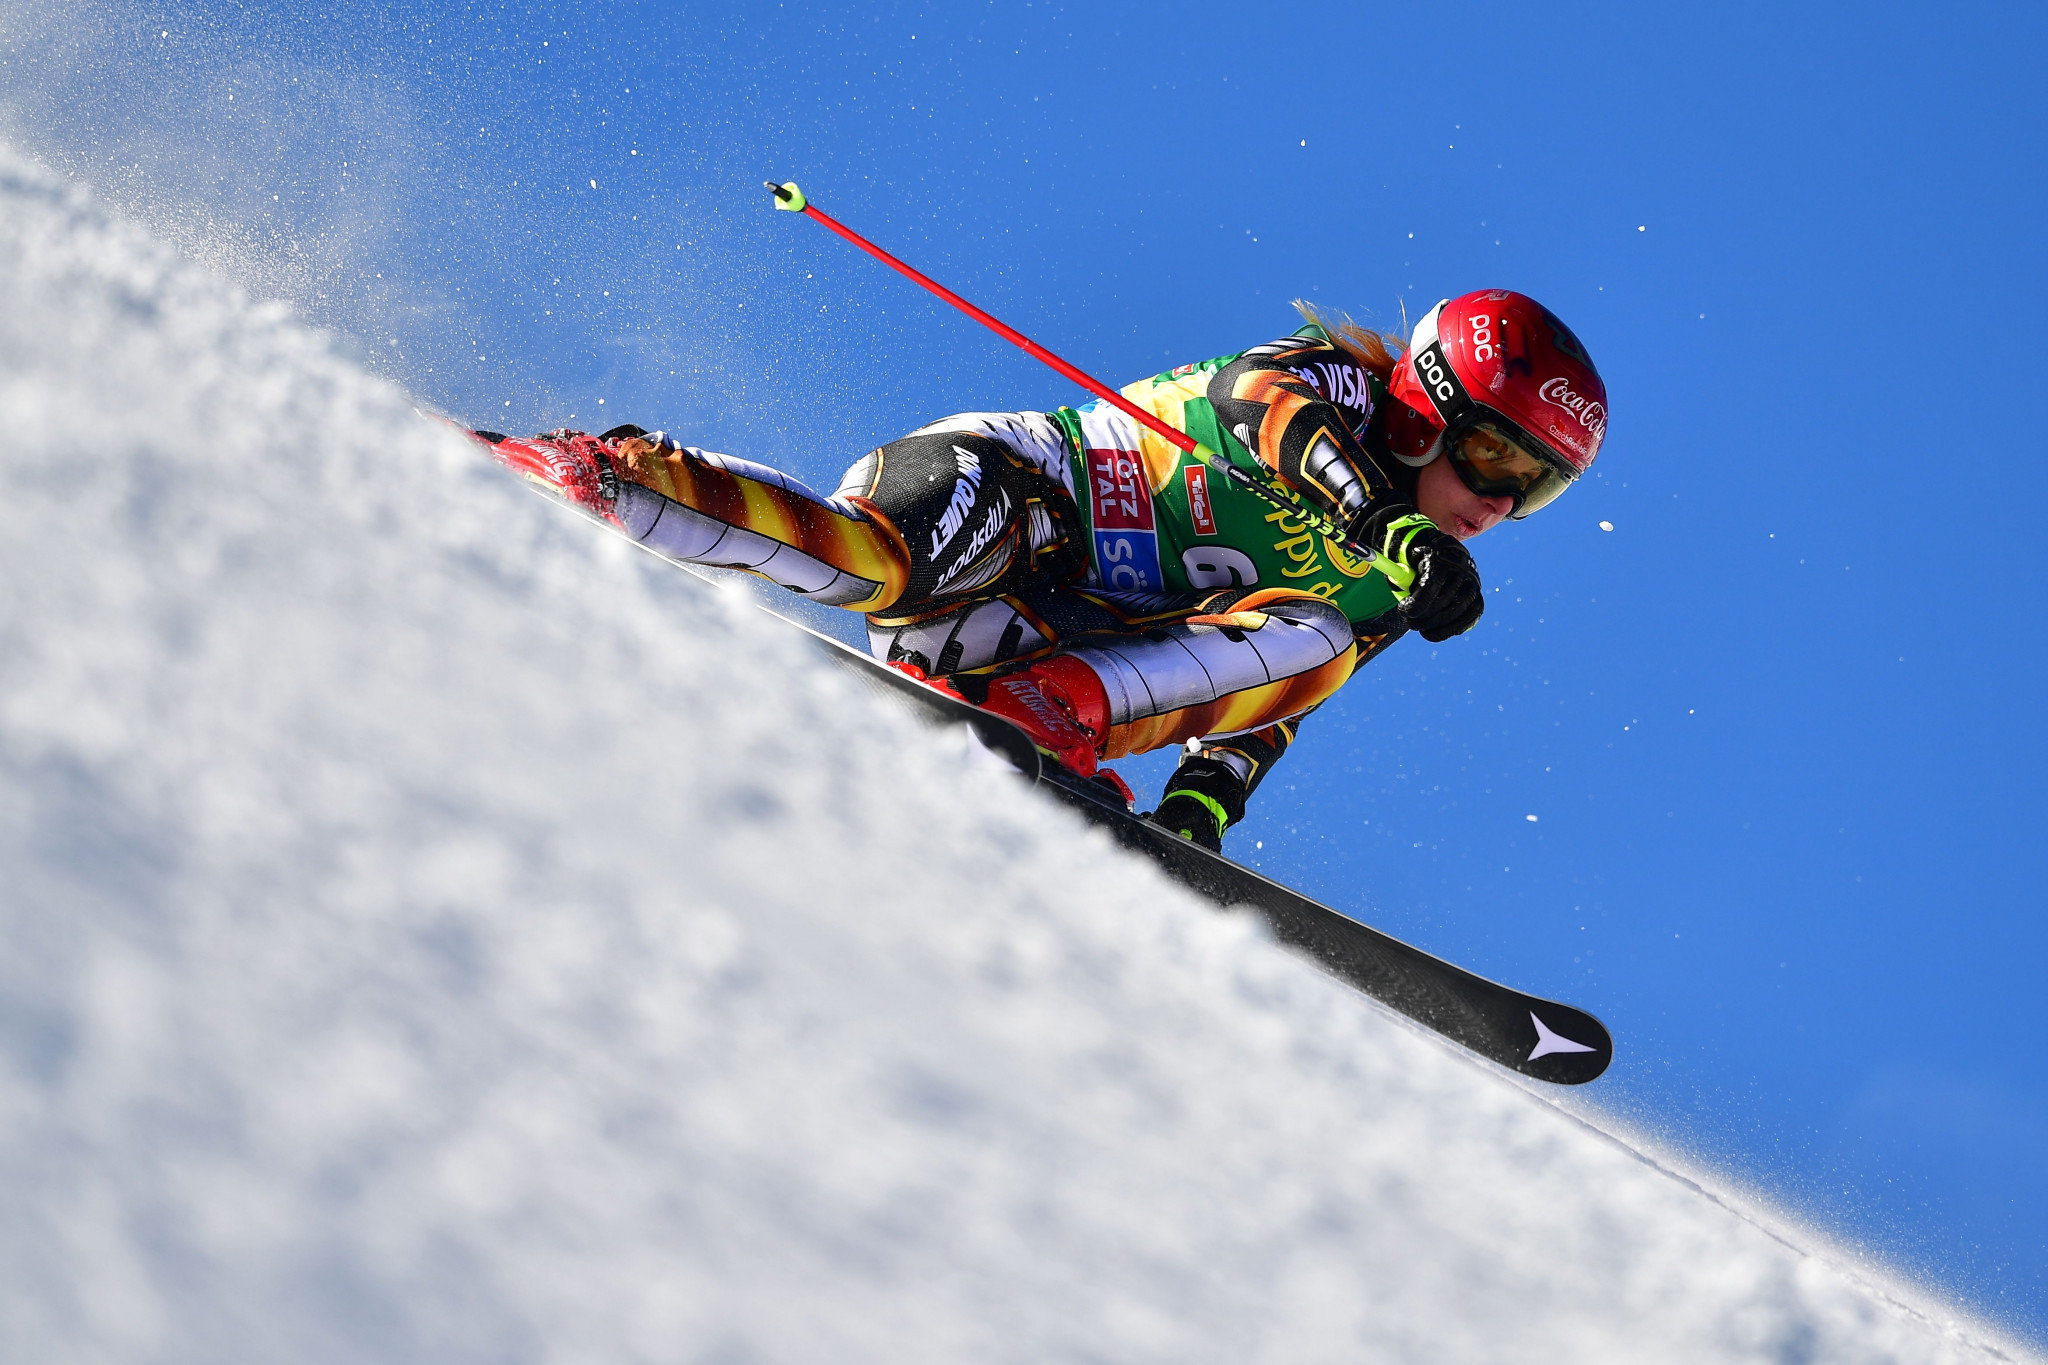 Ester Ledecka continued her strong World Cup form ©Getty Images